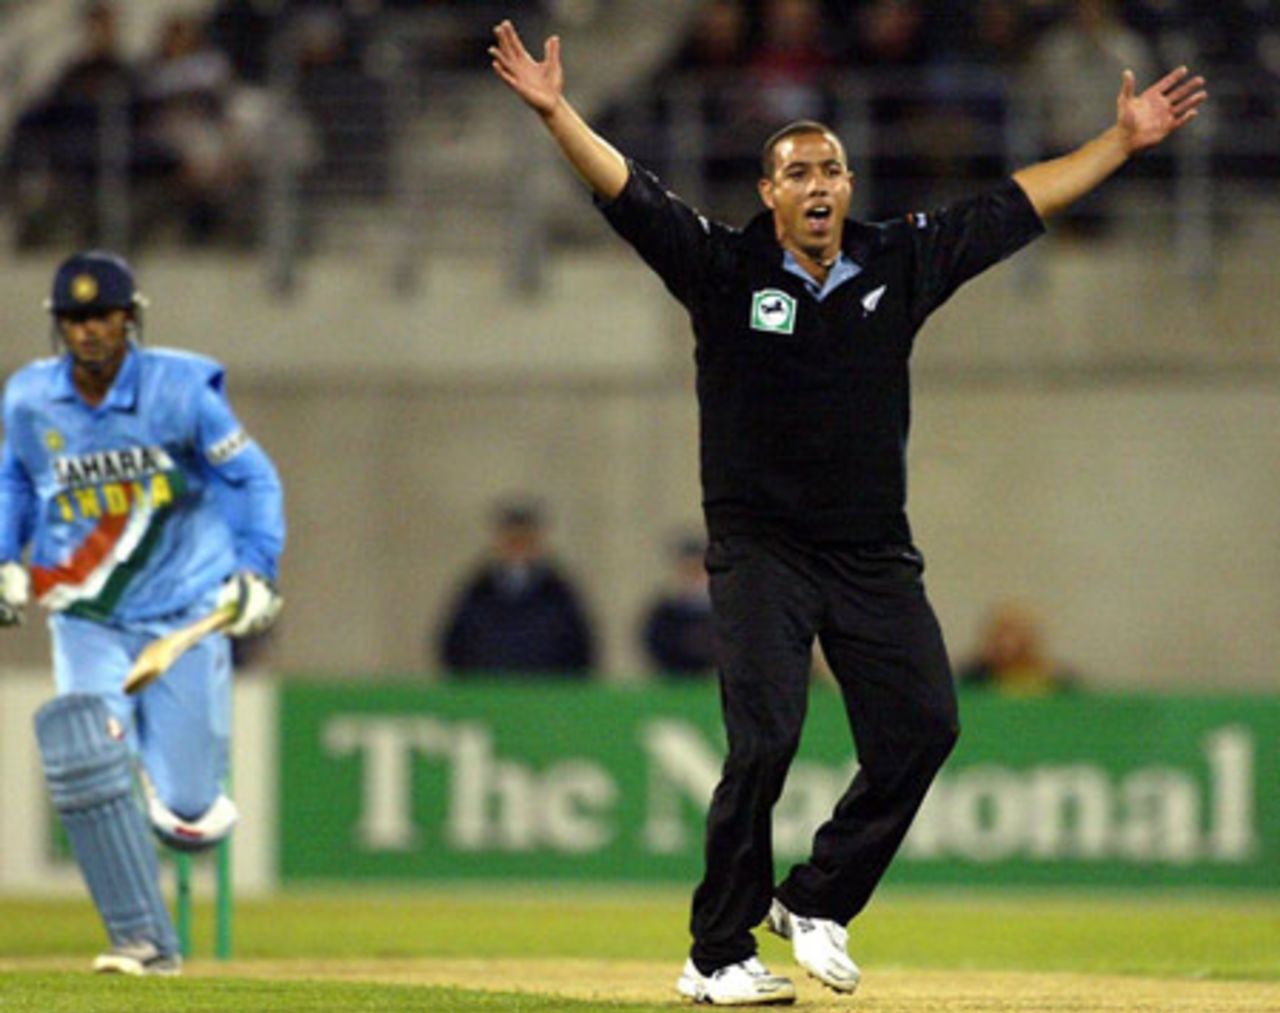 New Zealand bowler Andre Adams appeals for lbw against Indian batsman Mohammad Kaif during his second innings spell of 3-15 from two overs. The appeal was turned down by umpire Dave Quested. Super Max International: New Zealand v India at Jade Stadium, Christchurch, 4 December 2002.